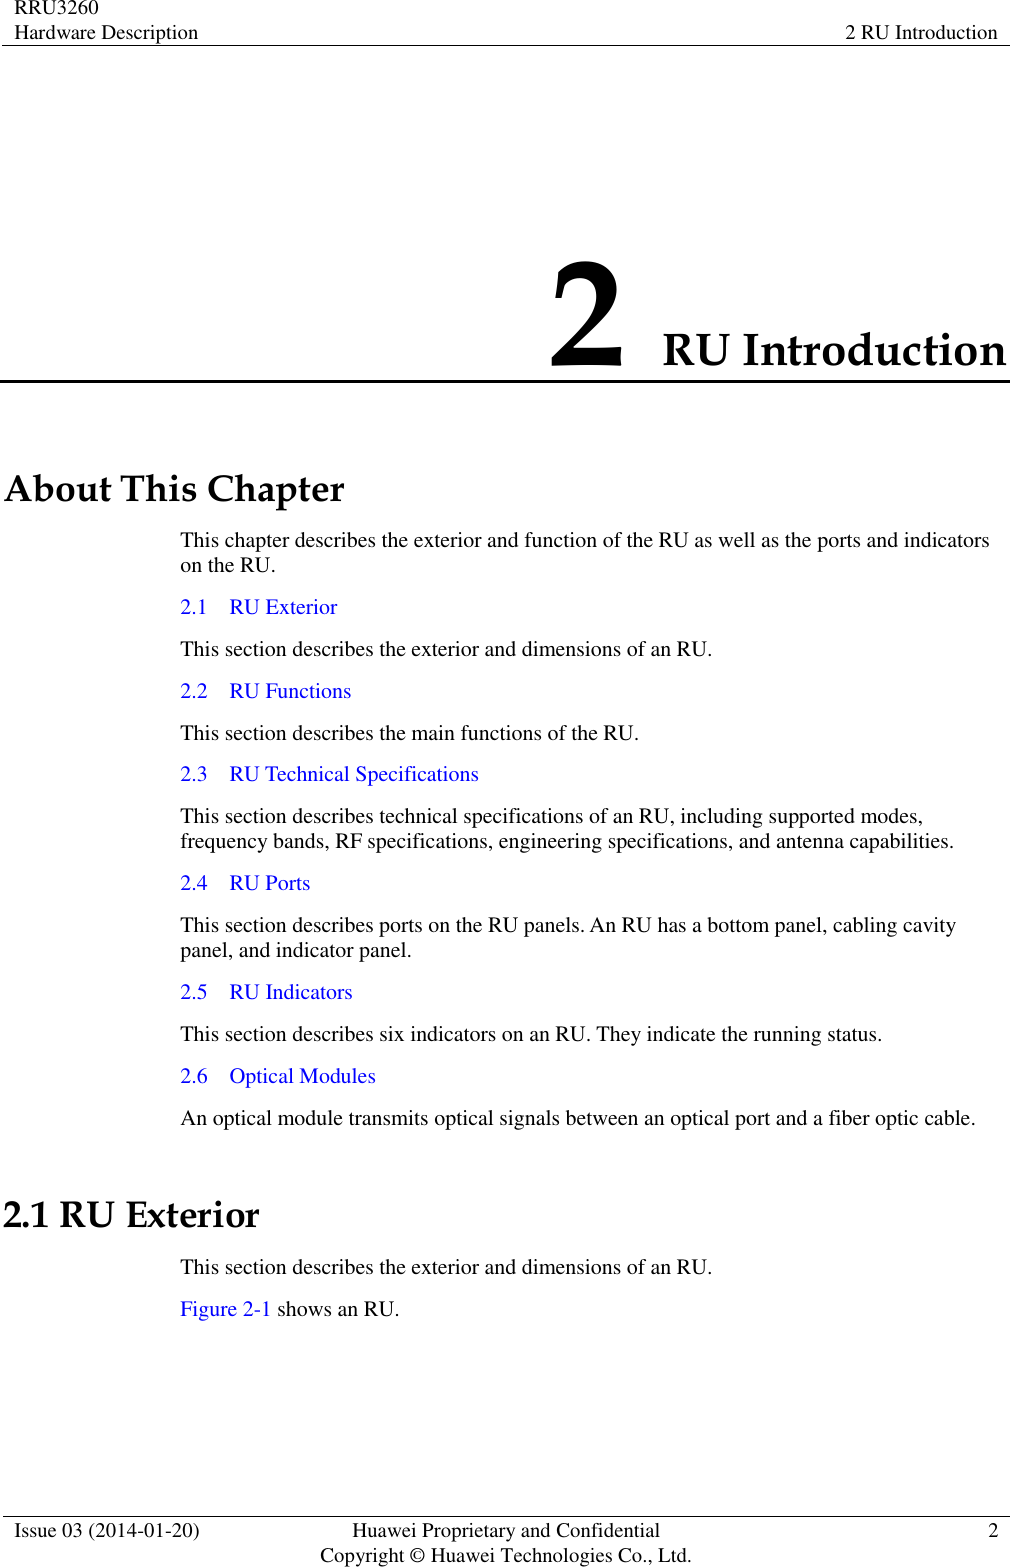 RRU3260 Hardware Description 2 RU Introduction  Issue 03 (2014-01-20) Huawei Proprietary and Confidential                                     Copyright © Huawei Technologies Co., Ltd. 2  2 RU Introduction About This Chapter This chapter describes the exterior and function of the RU as well as the ports and indicators on the RU. 2.1    RU Exterior This section describes the exterior and dimensions of an RU. 2.2    RU Functions This section describes the main functions of the RU. 2.3    RU Technical Specifications This section describes technical specifications of an RU, including supported modes, frequency bands, RF specifications, engineering specifications, and antenna capabilities. 2.4    RU Ports This section describes ports on the RU panels. An RU has a bottom panel, cabling cavity panel, and indicator panel. 2.5    RU Indicators This section describes six indicators on an RU. They indicate the running status.   2.6    Optical Modules An optical module transmits optical signals between an optical port and a fiber optic cable. 2.1 RU Exterior This section describes the exterior and dimensions of an RU. Figure 2-1 shows an RU.   